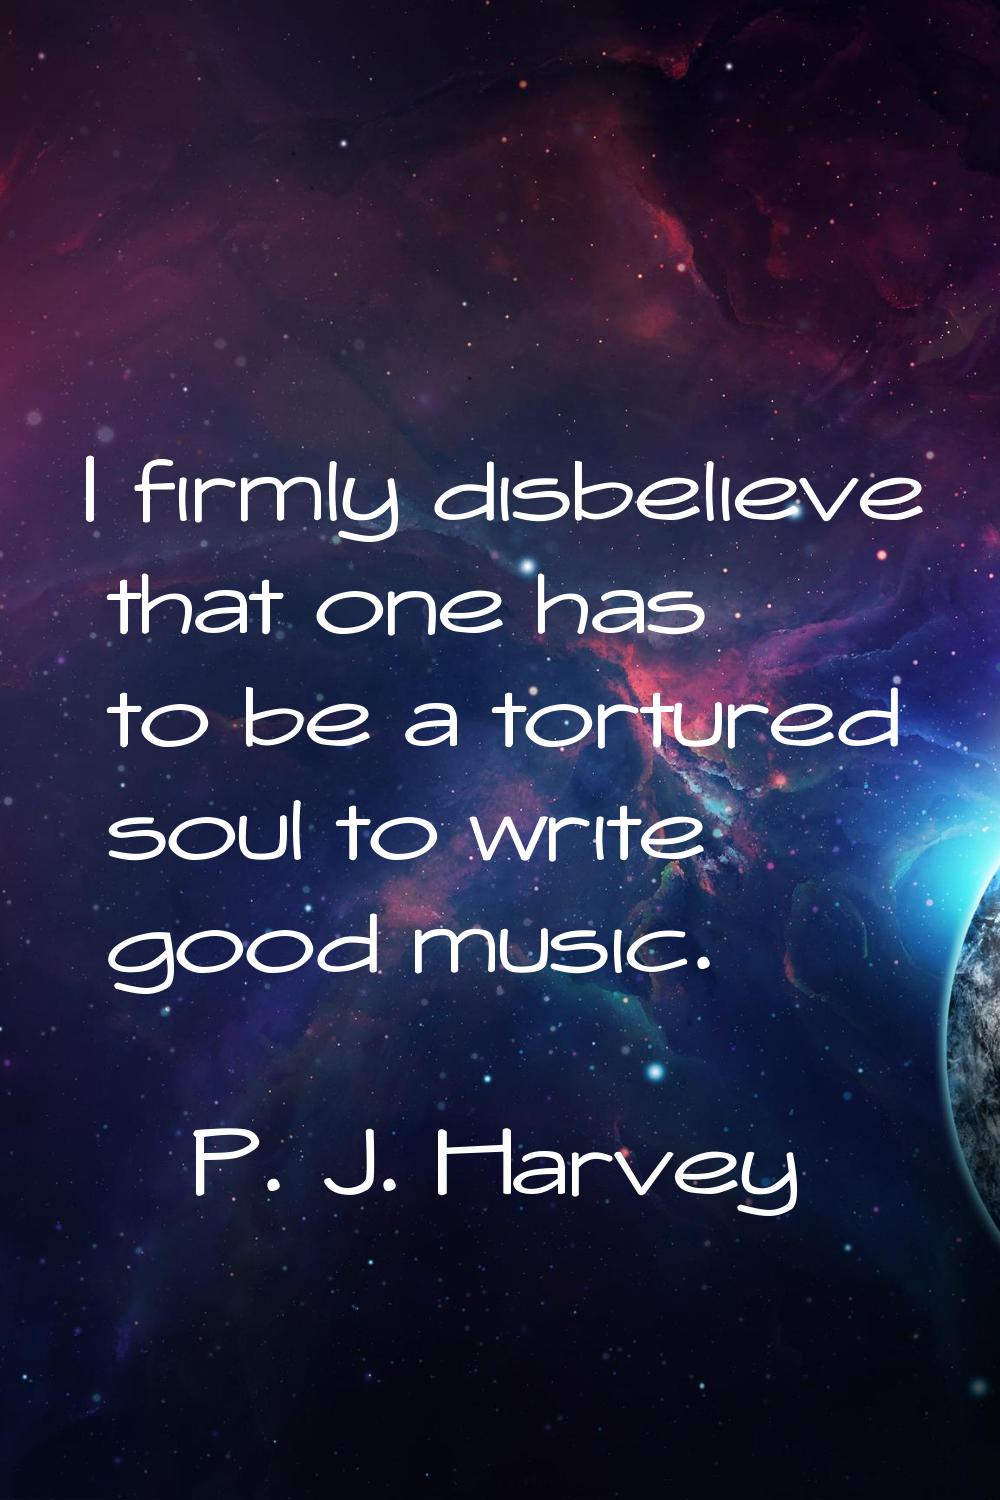 I firmly disbelieve that one has to be a tortured soul to write good music.